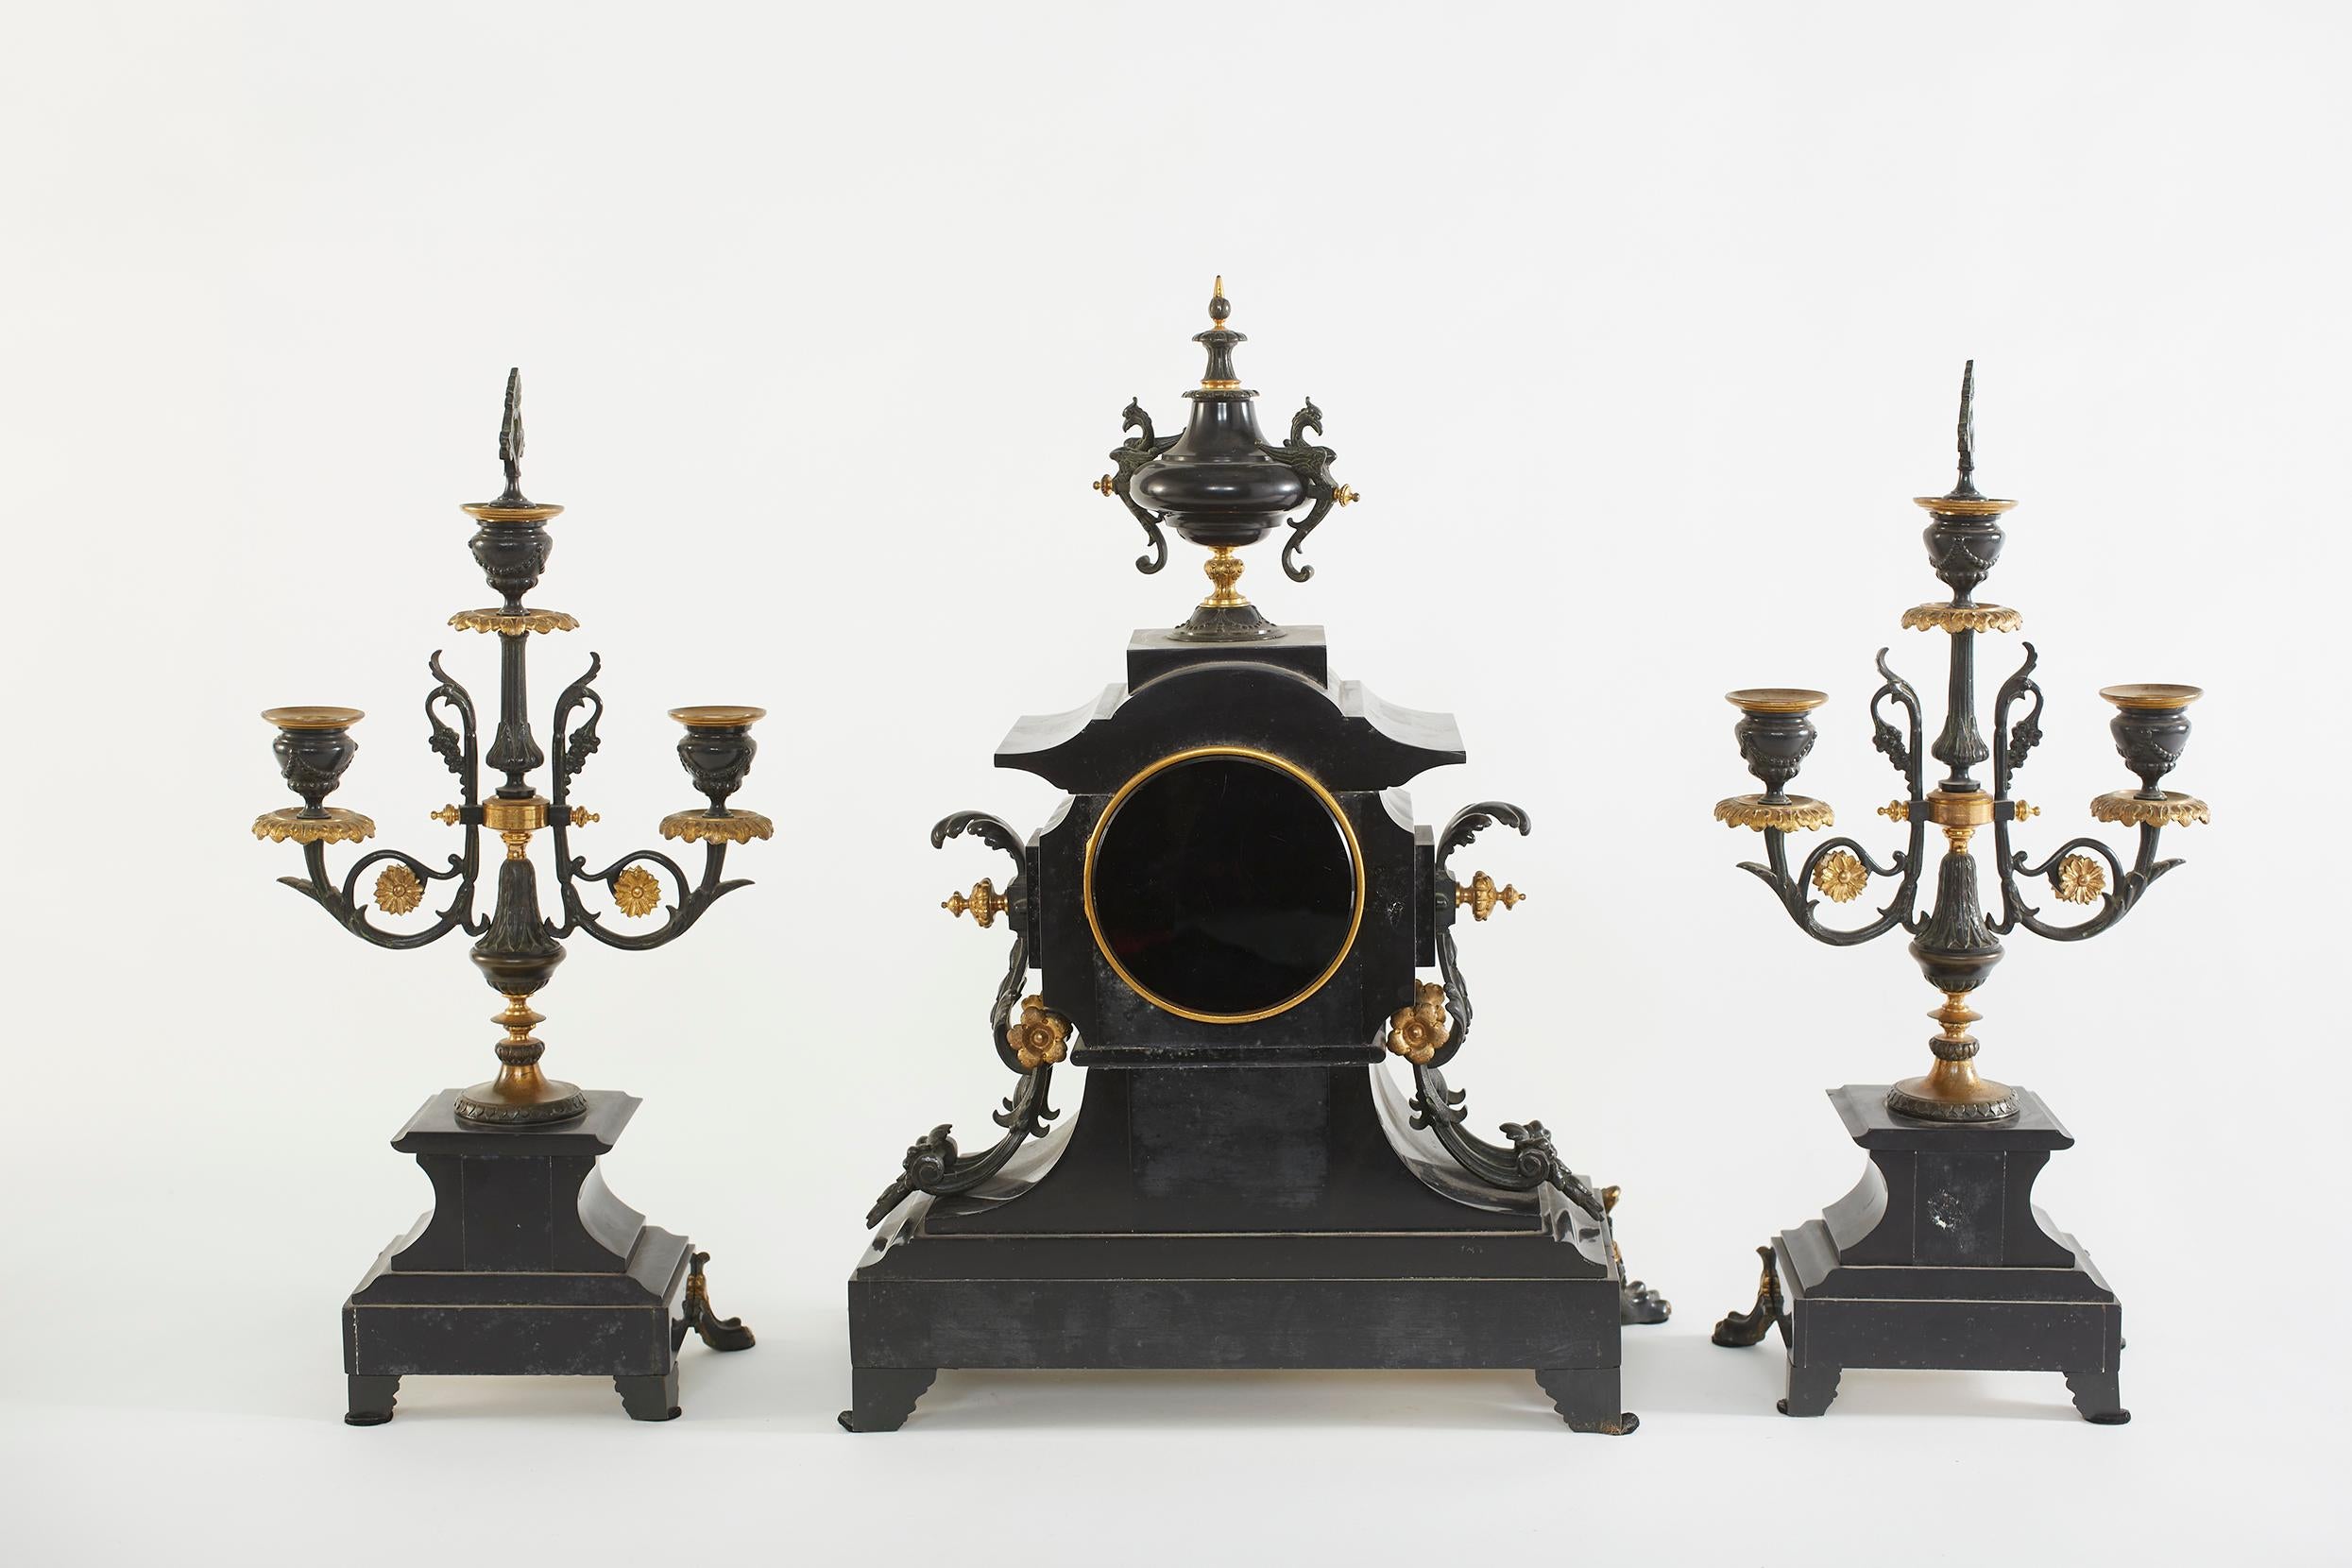 French bronze & polish black marble with applied bronze trim three piece clock garniture set. The clock surmounted by an urn flanked & griffins. Clock face with gold Roman numerals and spade hands. Illegible signature, brass 8 day movement with rack